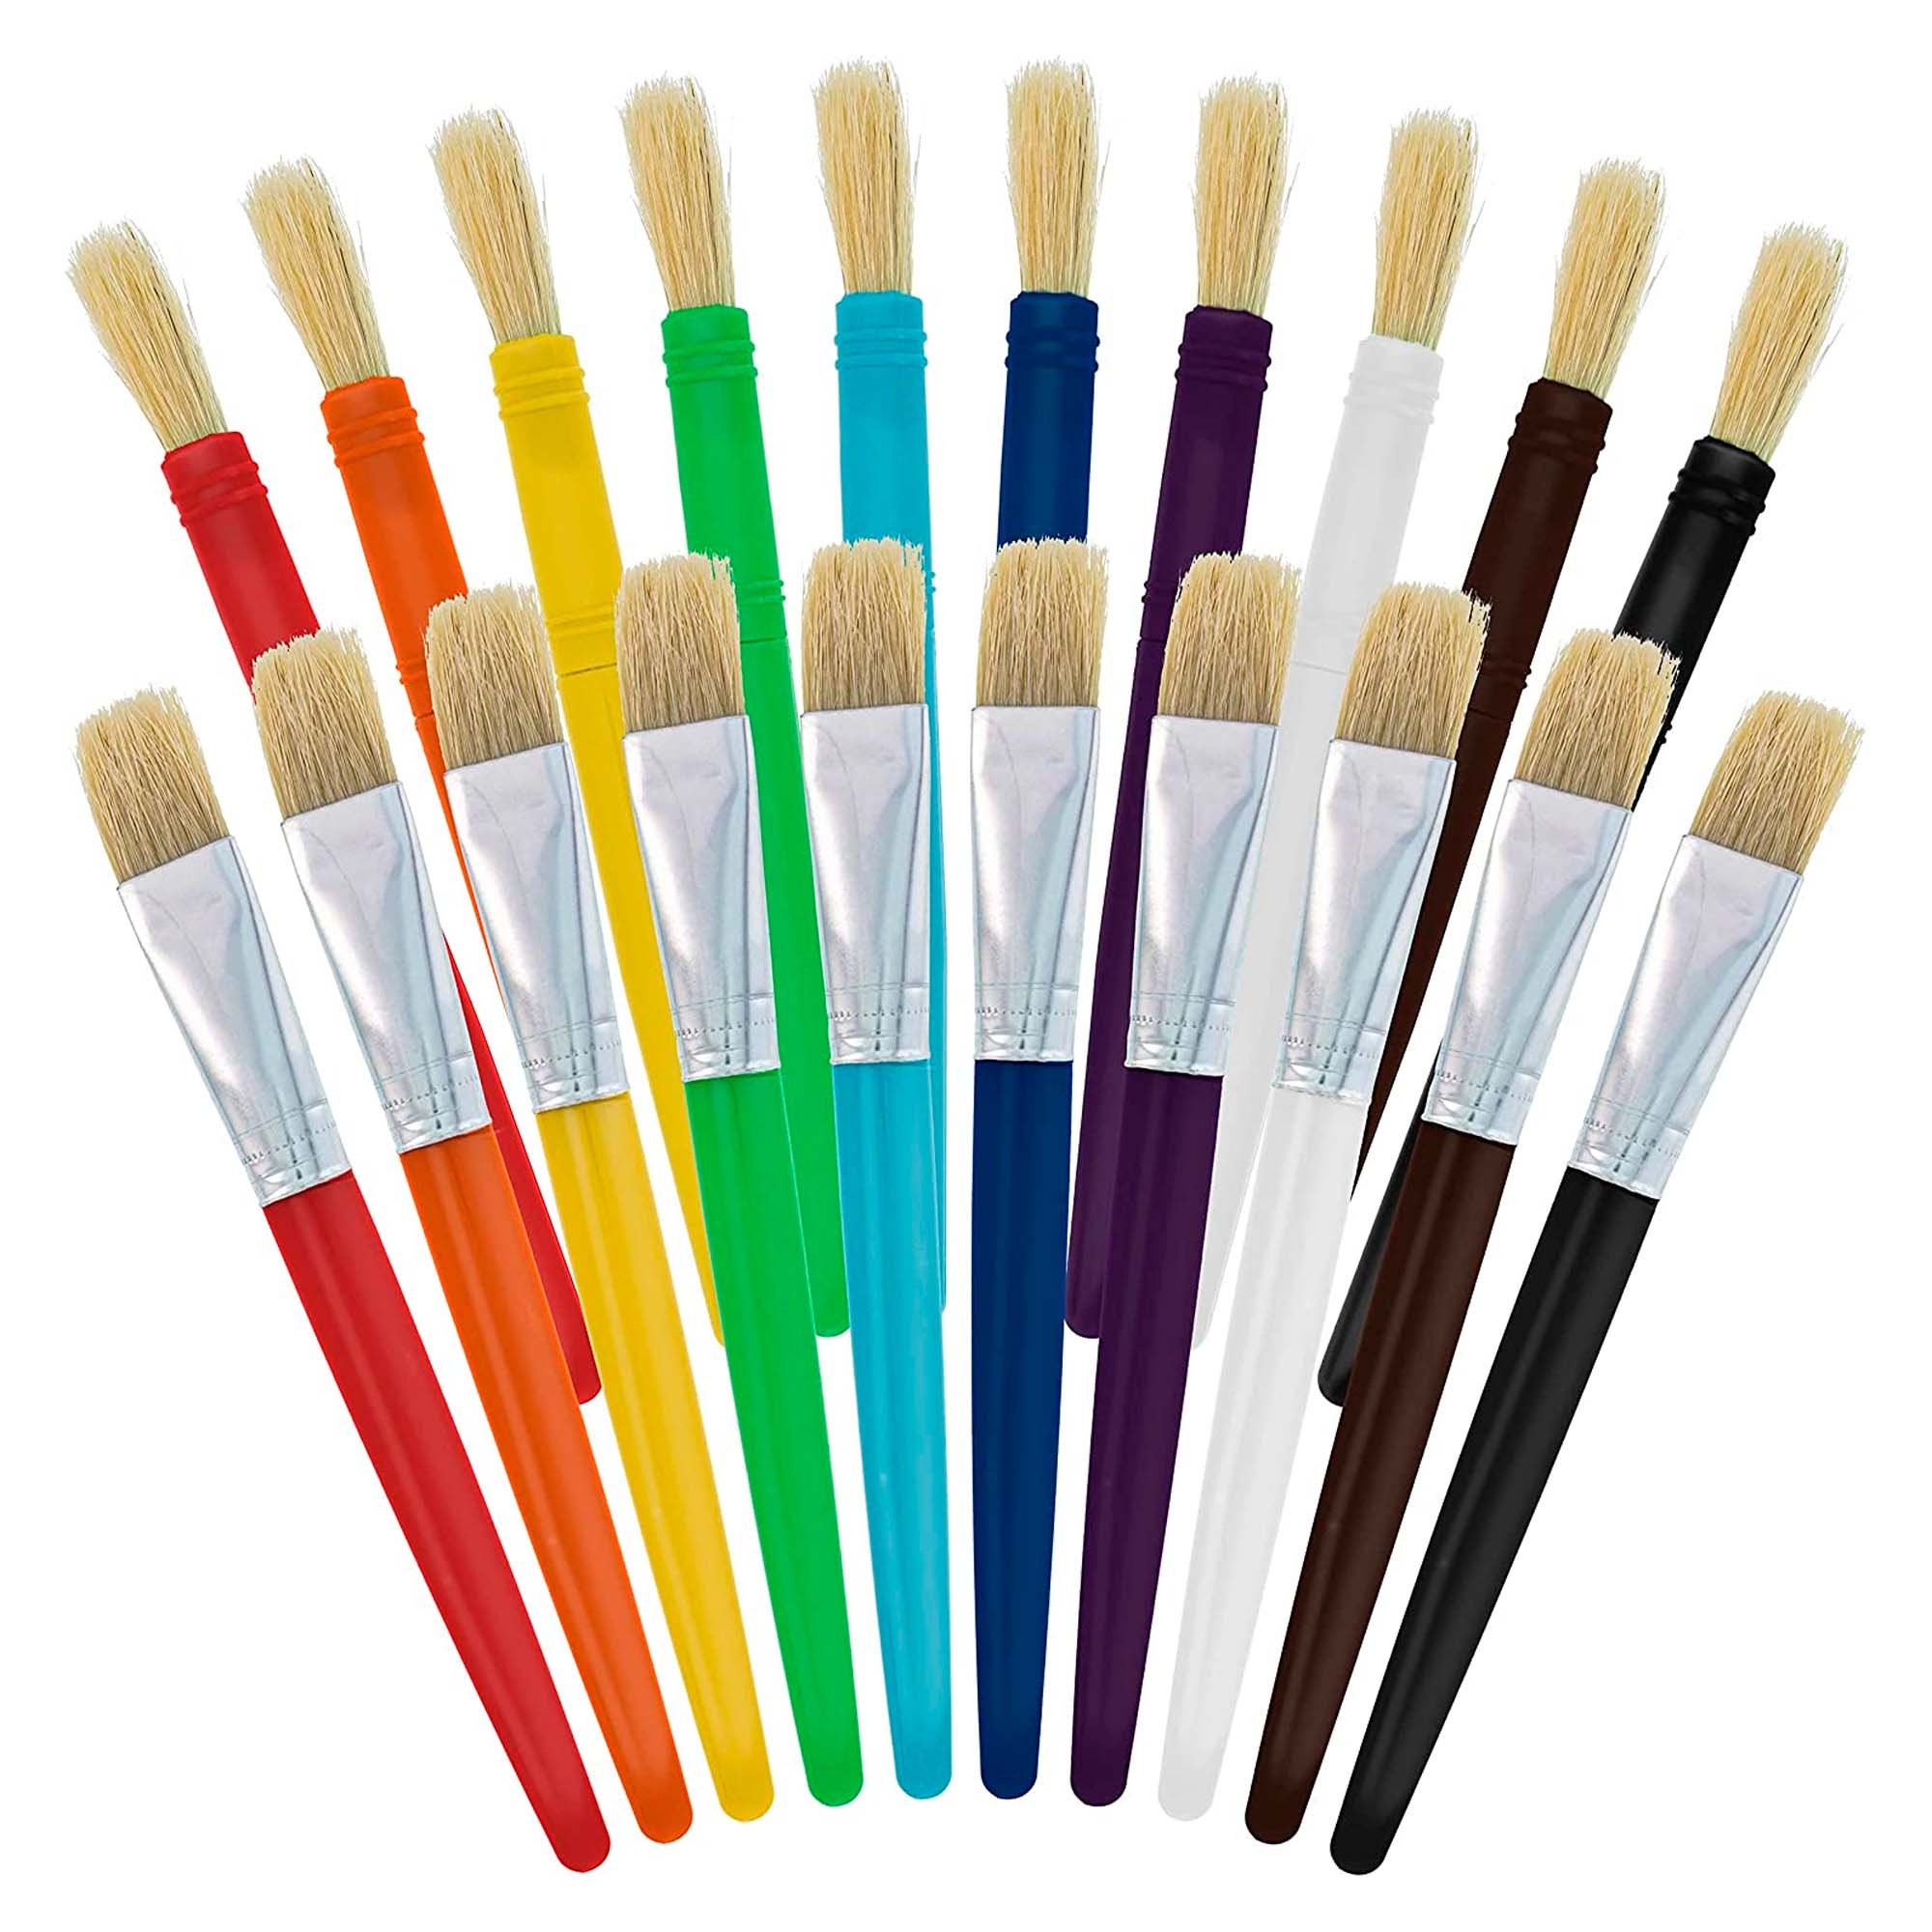 ARTEGRIA Watercolor Brush Set 10 Watercolor Paint Brushes With Soft  Synthetic Squirrel Hair for Water Color, Gouache, Ink, Fluid Acrylics 